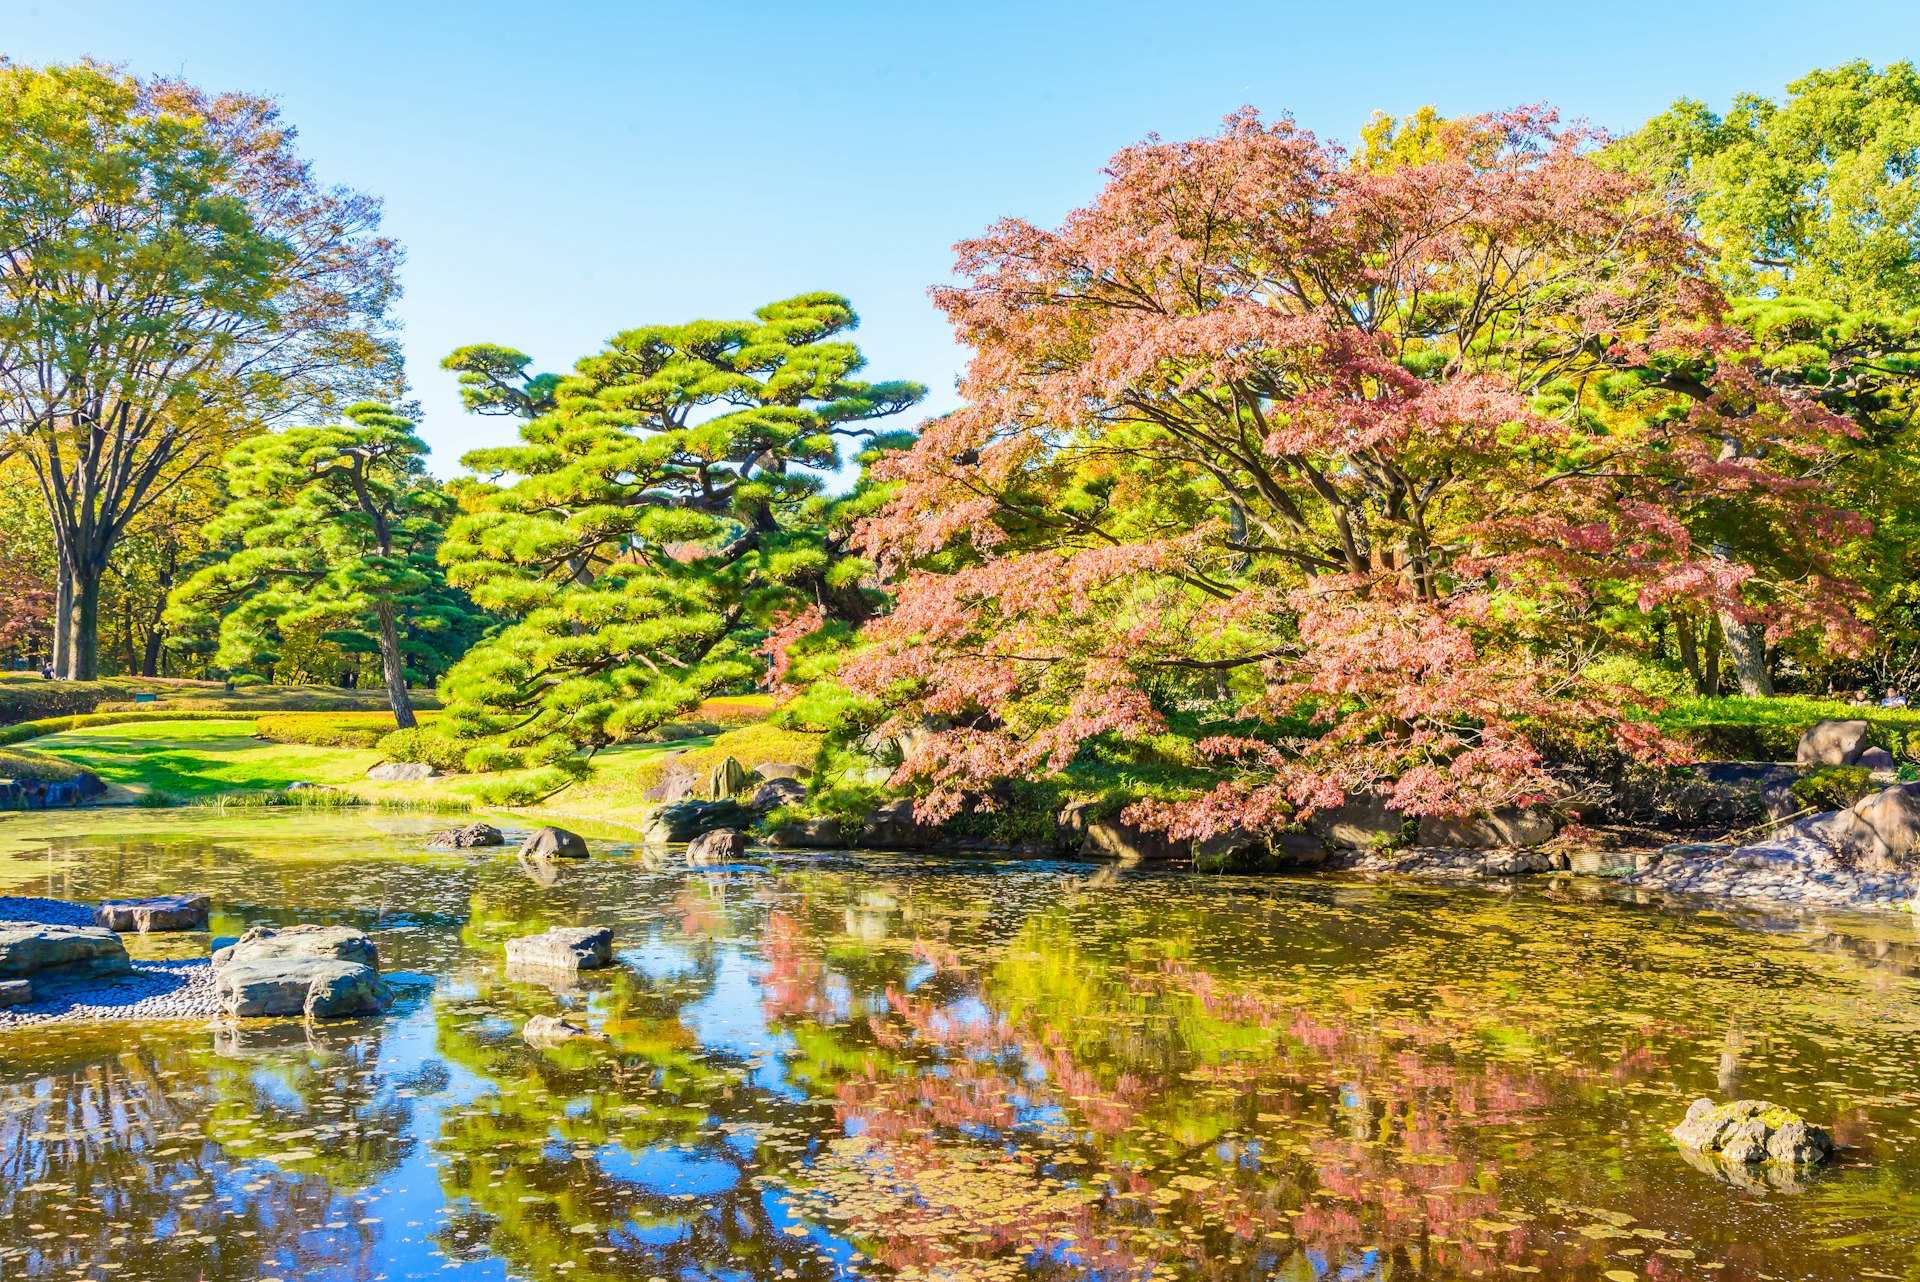 Garden in the park at imperial palace - Japan